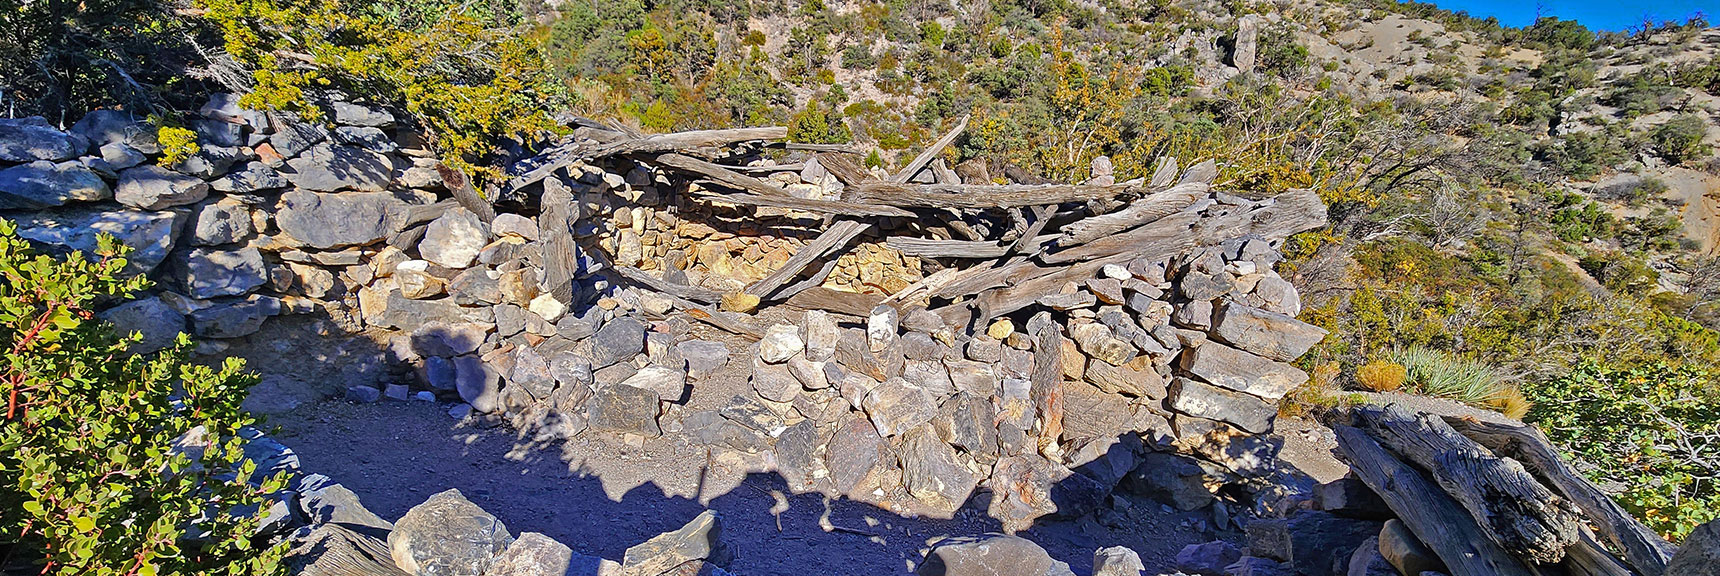 Miner's Cabin Has Two Rooms and Roof of Branches | Keystone Thrust West Summit Above White Rock Mountain | La Madre Mountains Wilderness, Nevada